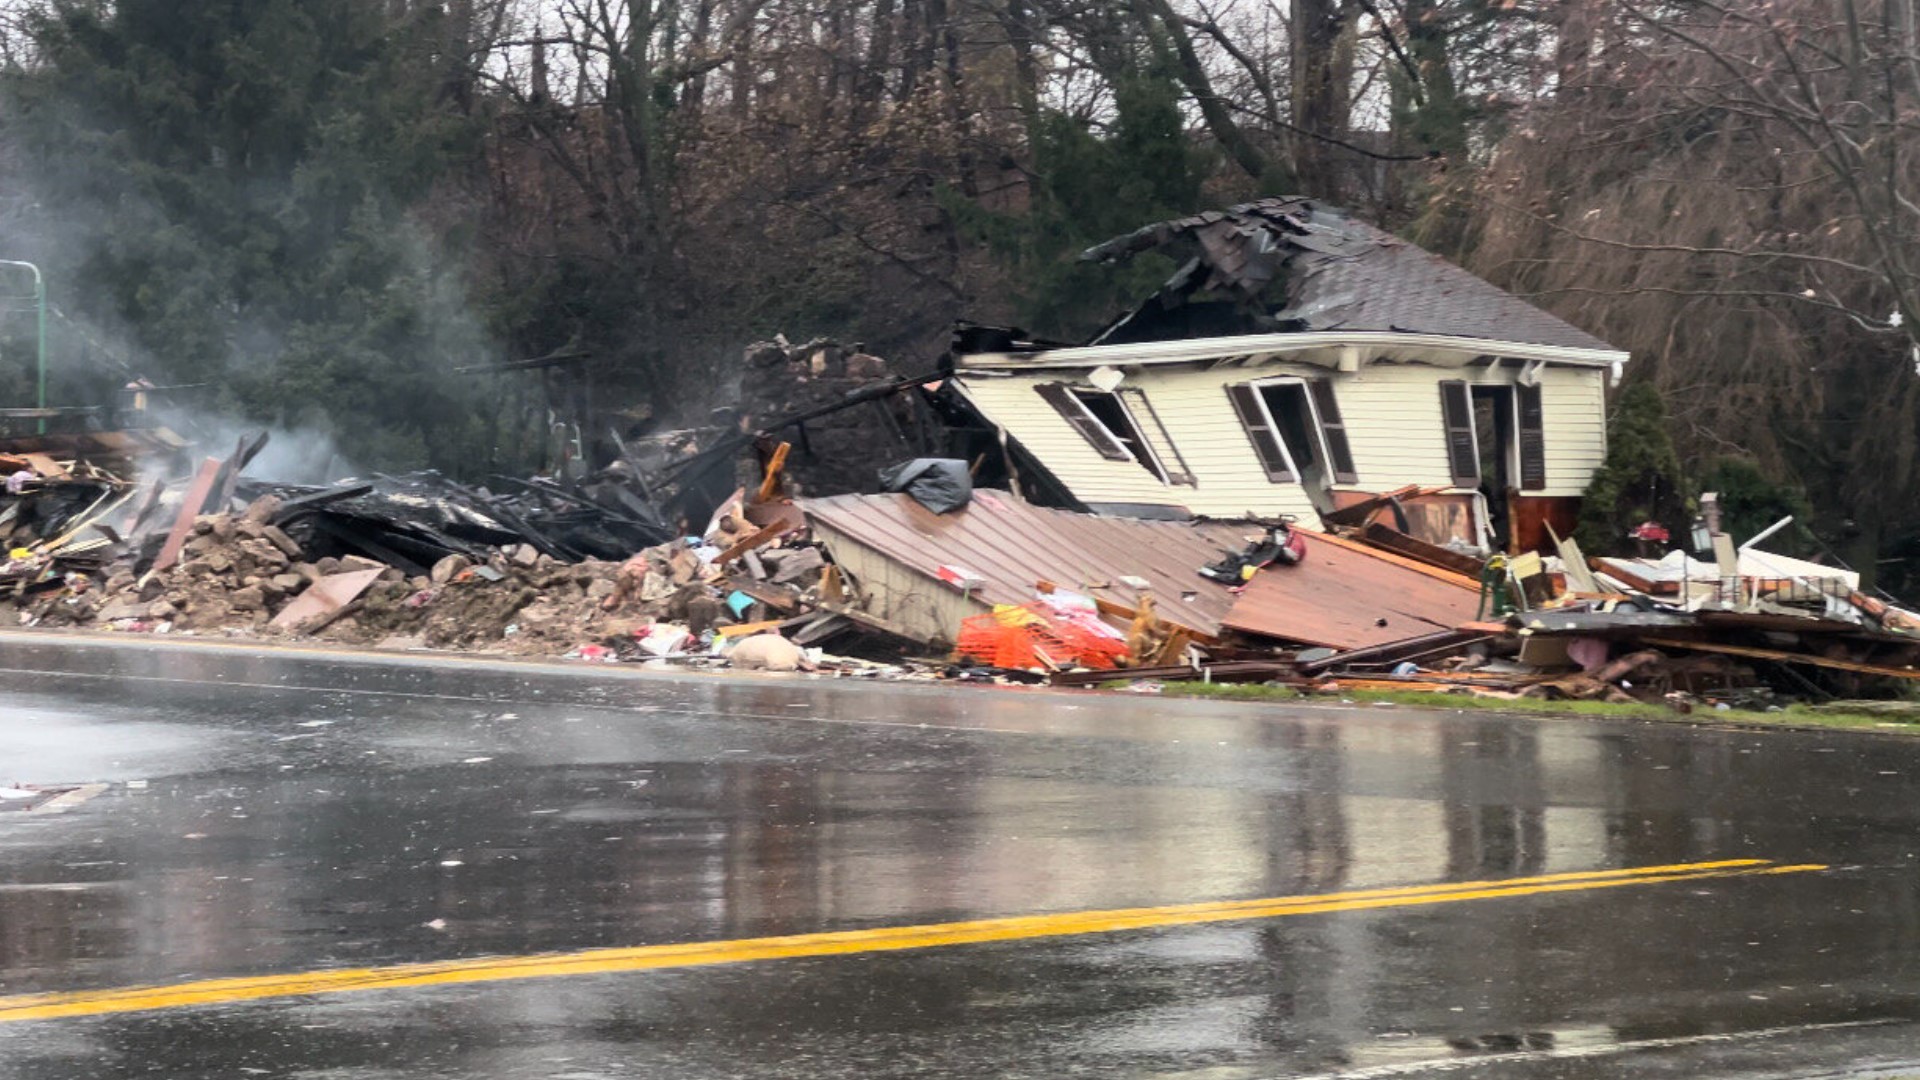 An East Earl Township home is a total loss after a fire broke out just before 4:30 a.m. The house collapsed in the early morning hours.